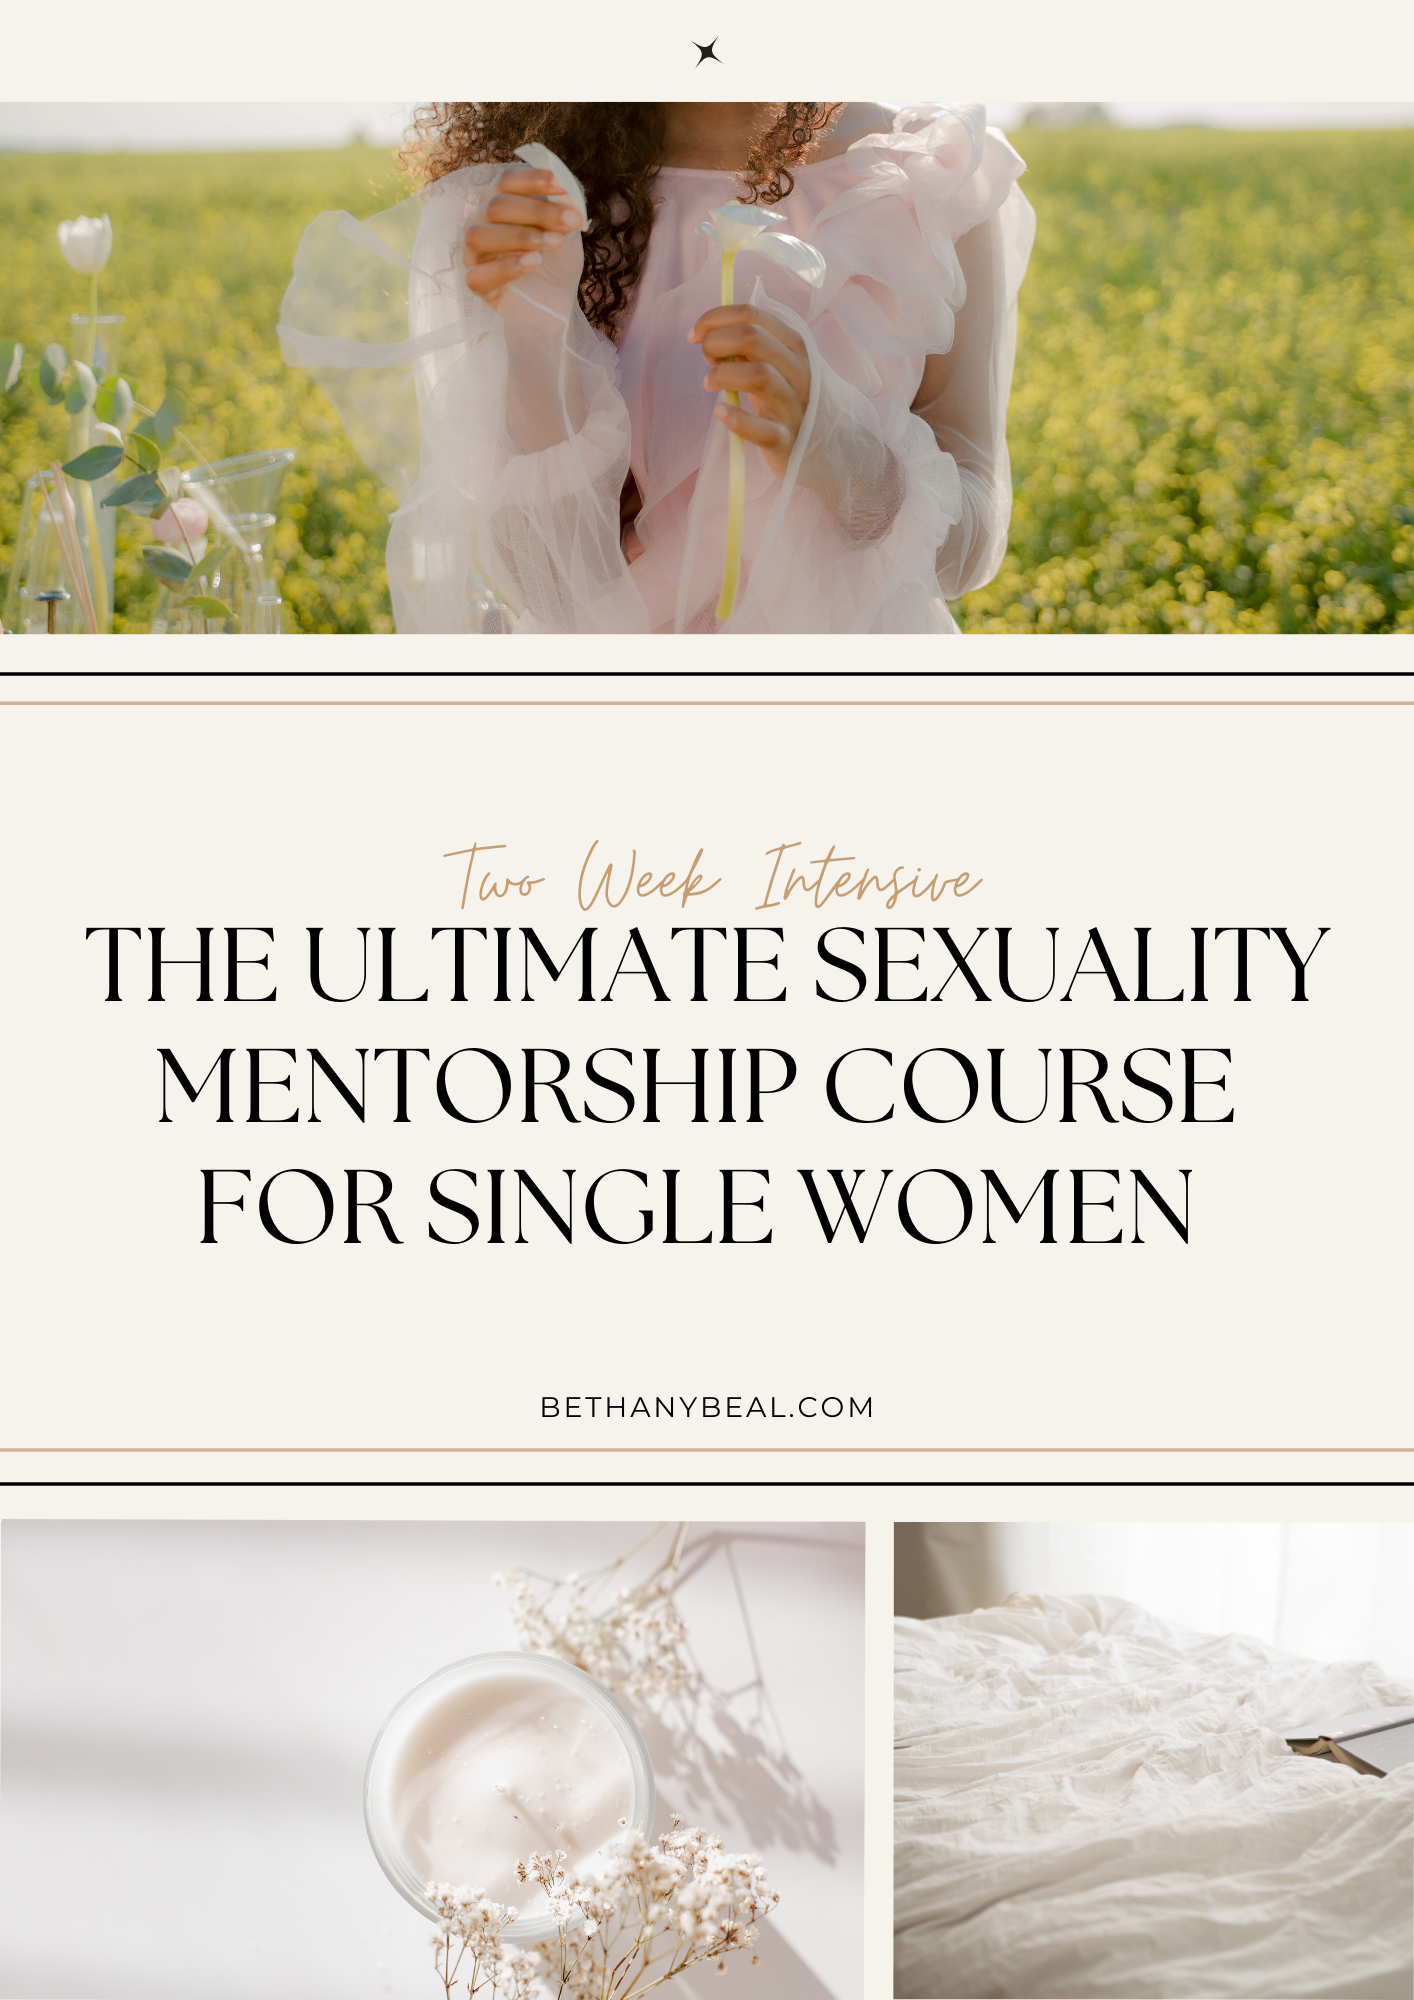 The Ultimate Sexuality Mentorship Course for Single Women